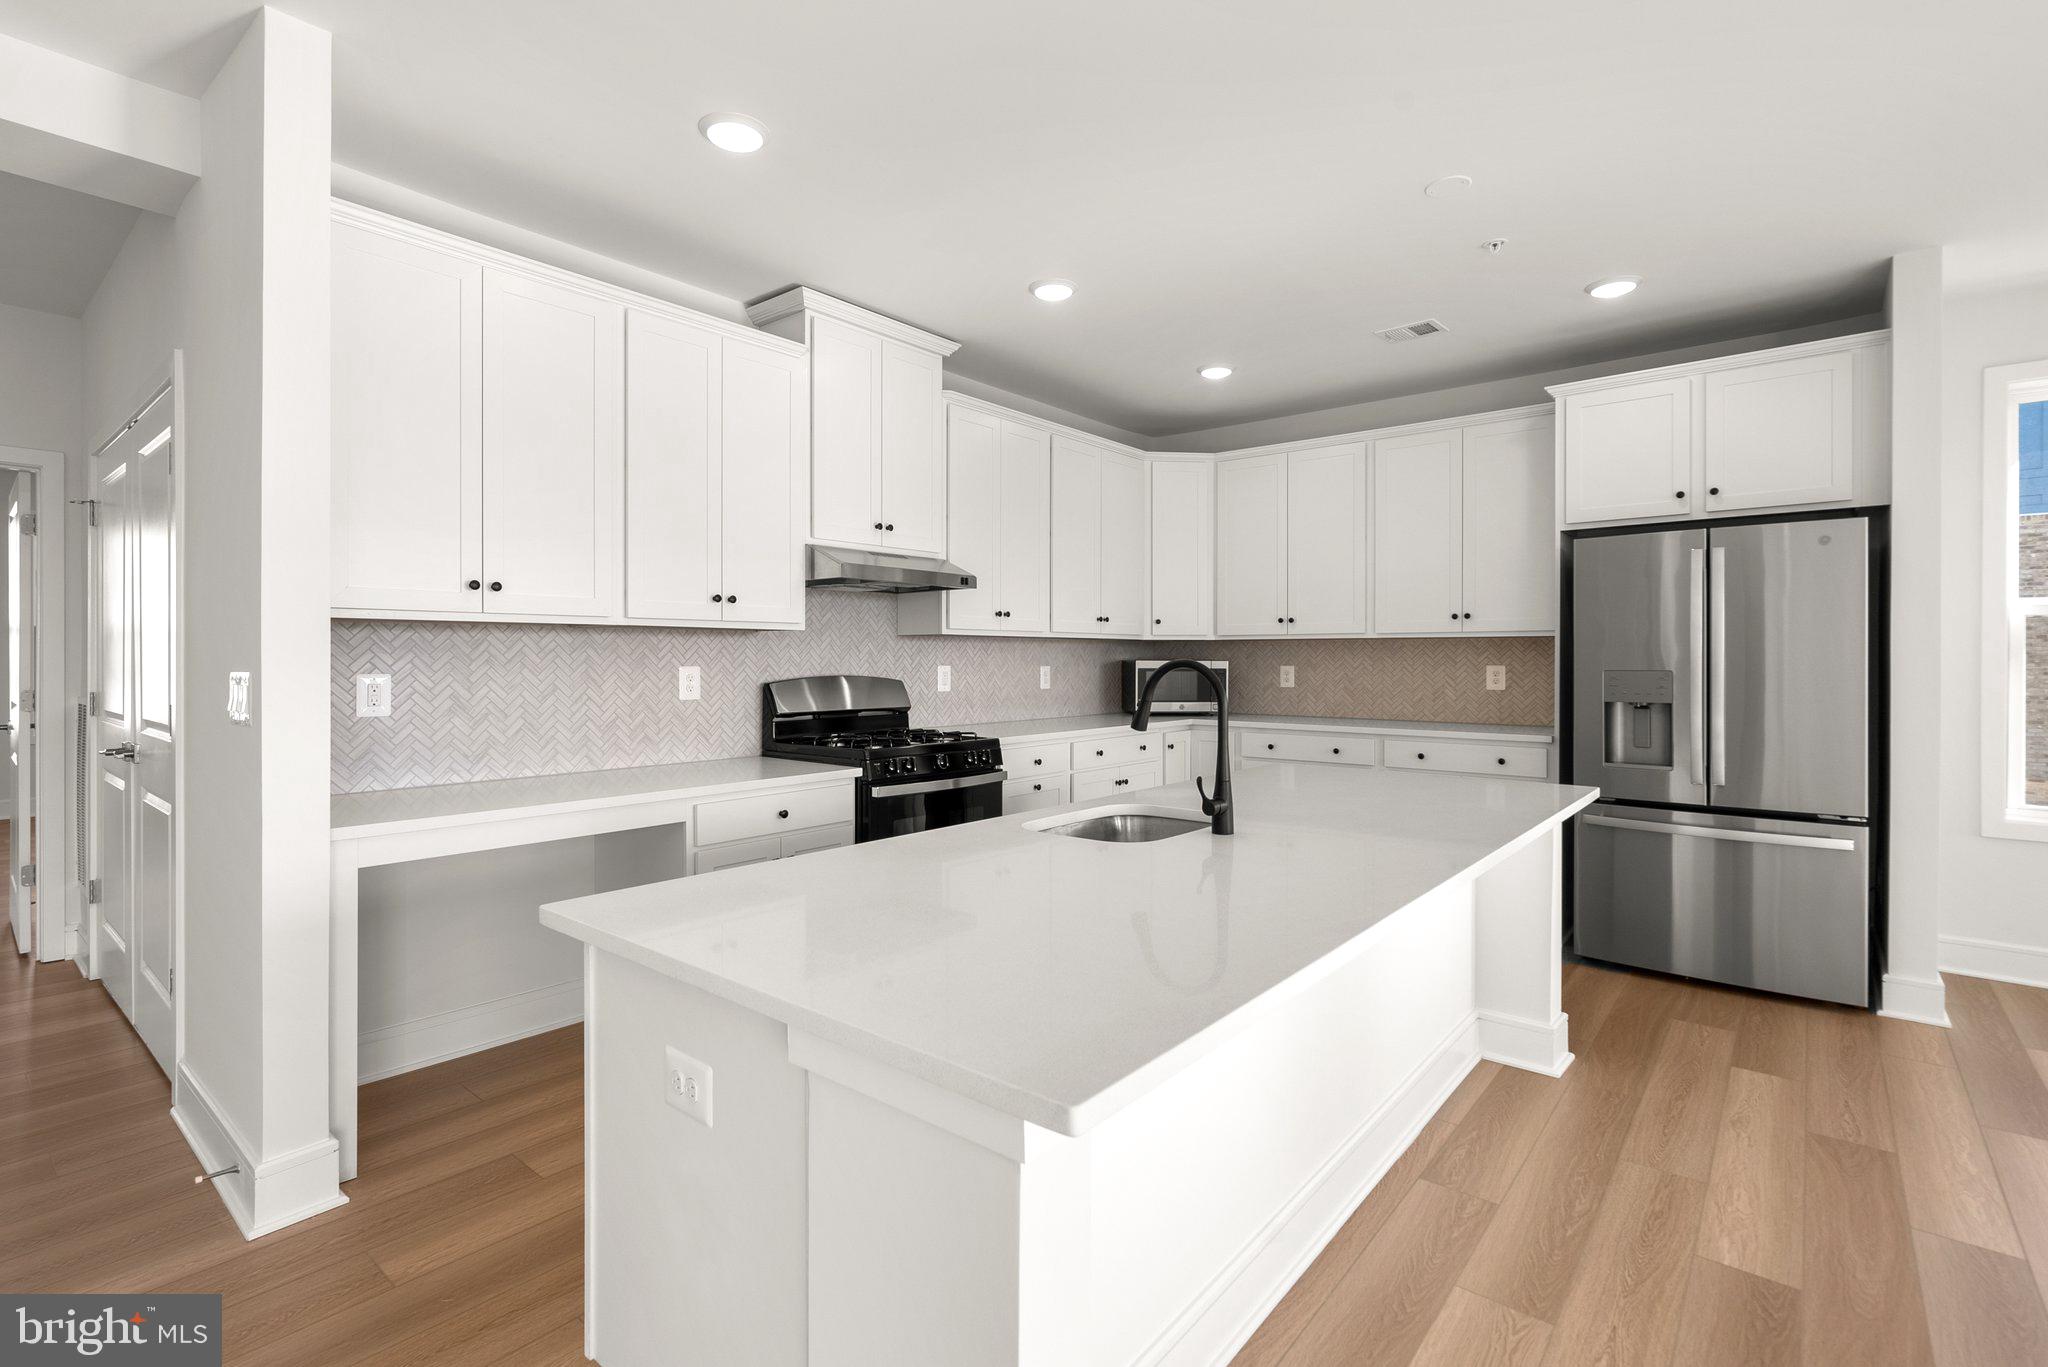 a kitchen with a refrigerator a white cabinets and white stainless steel appliances